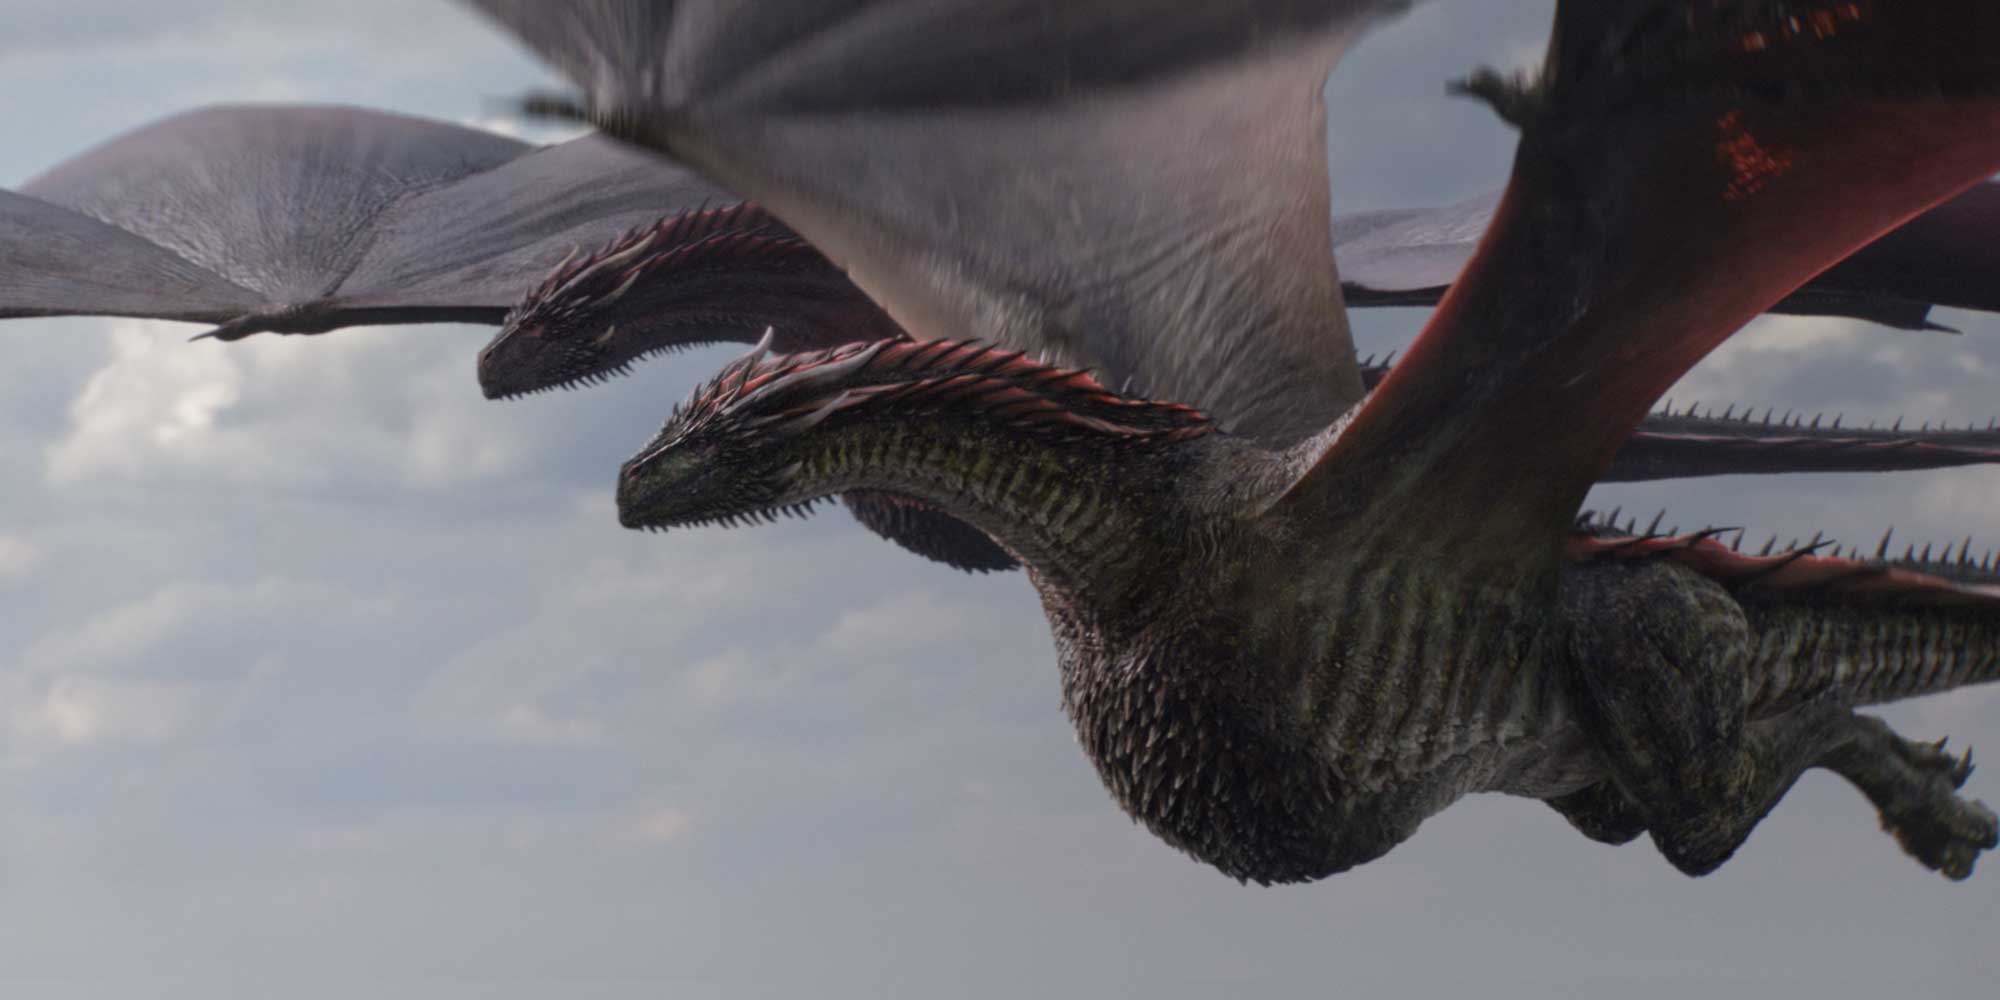 Dragons Above Cloud Game Of Throne Season 8 Wallpapers